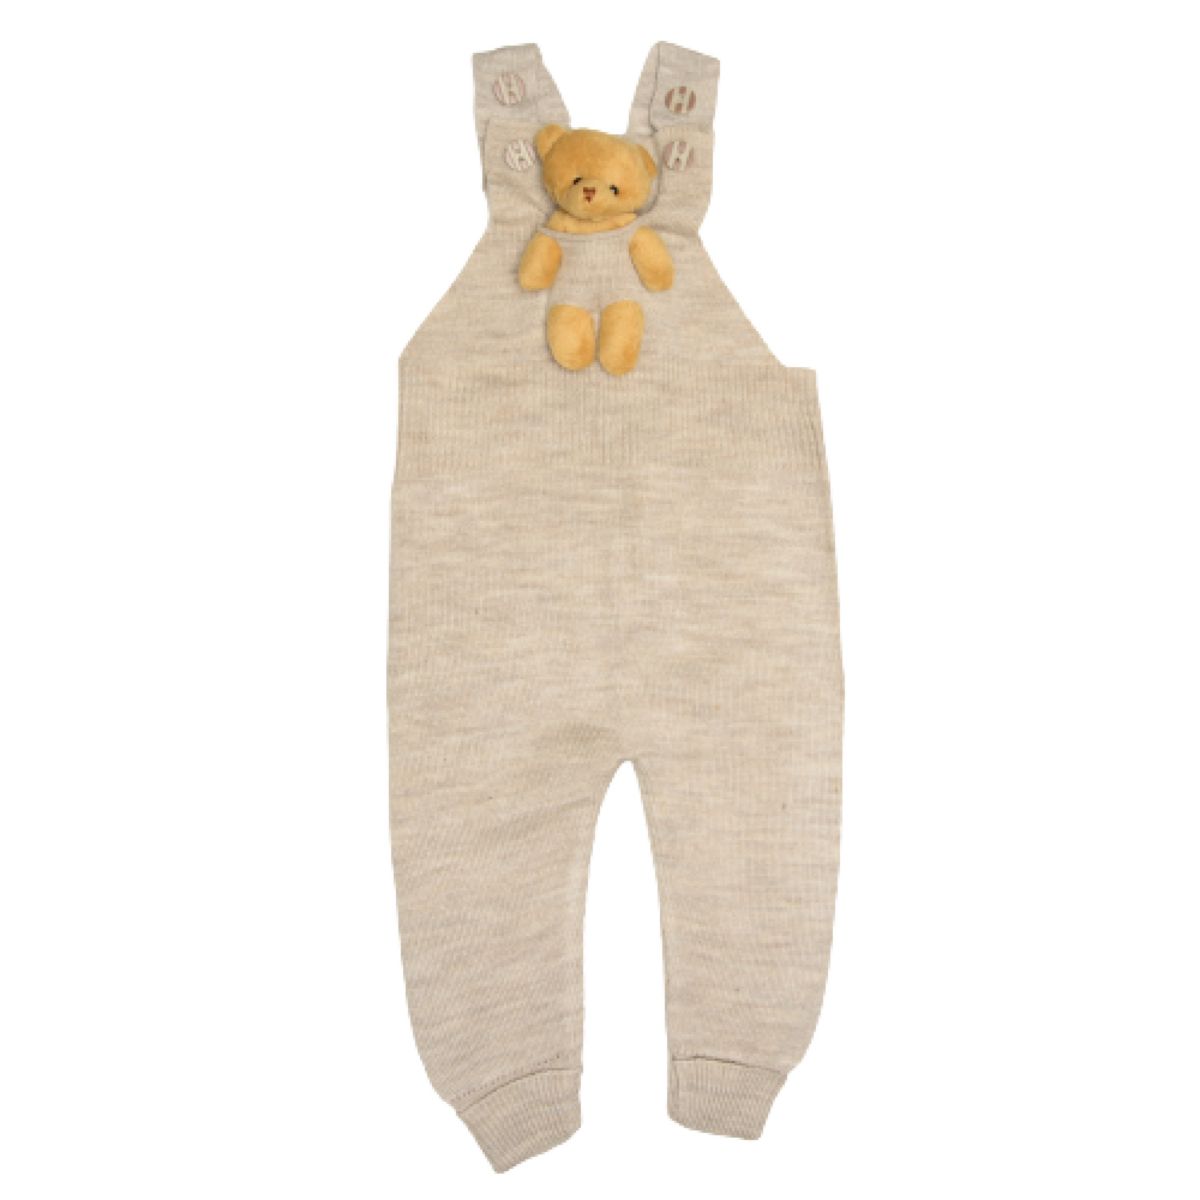 Baby & Toddler Overalls with Teddy Bear For Toddlers, Cute Outfit For Boys & Girls WEAR SIERRA